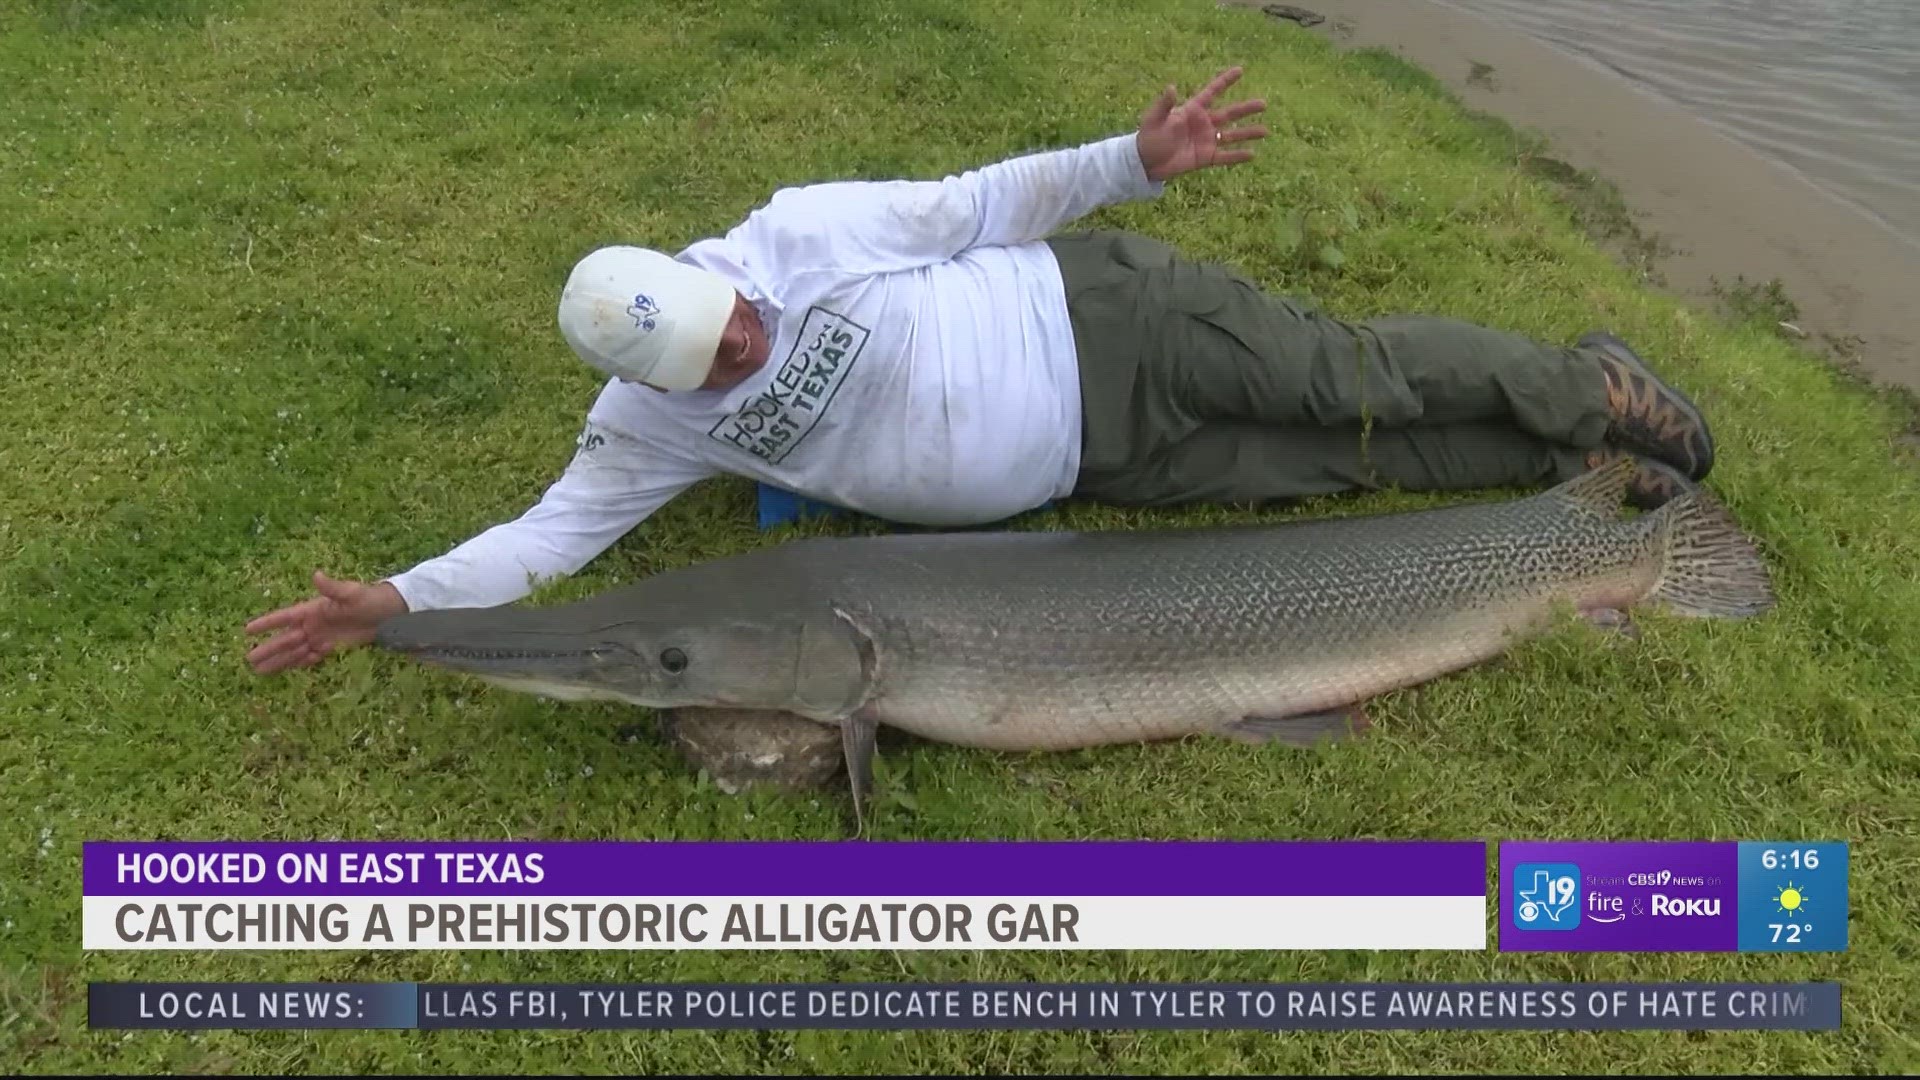 For more hooked on east texas stories, visit cbs19.tv/hooked-on-east-texas